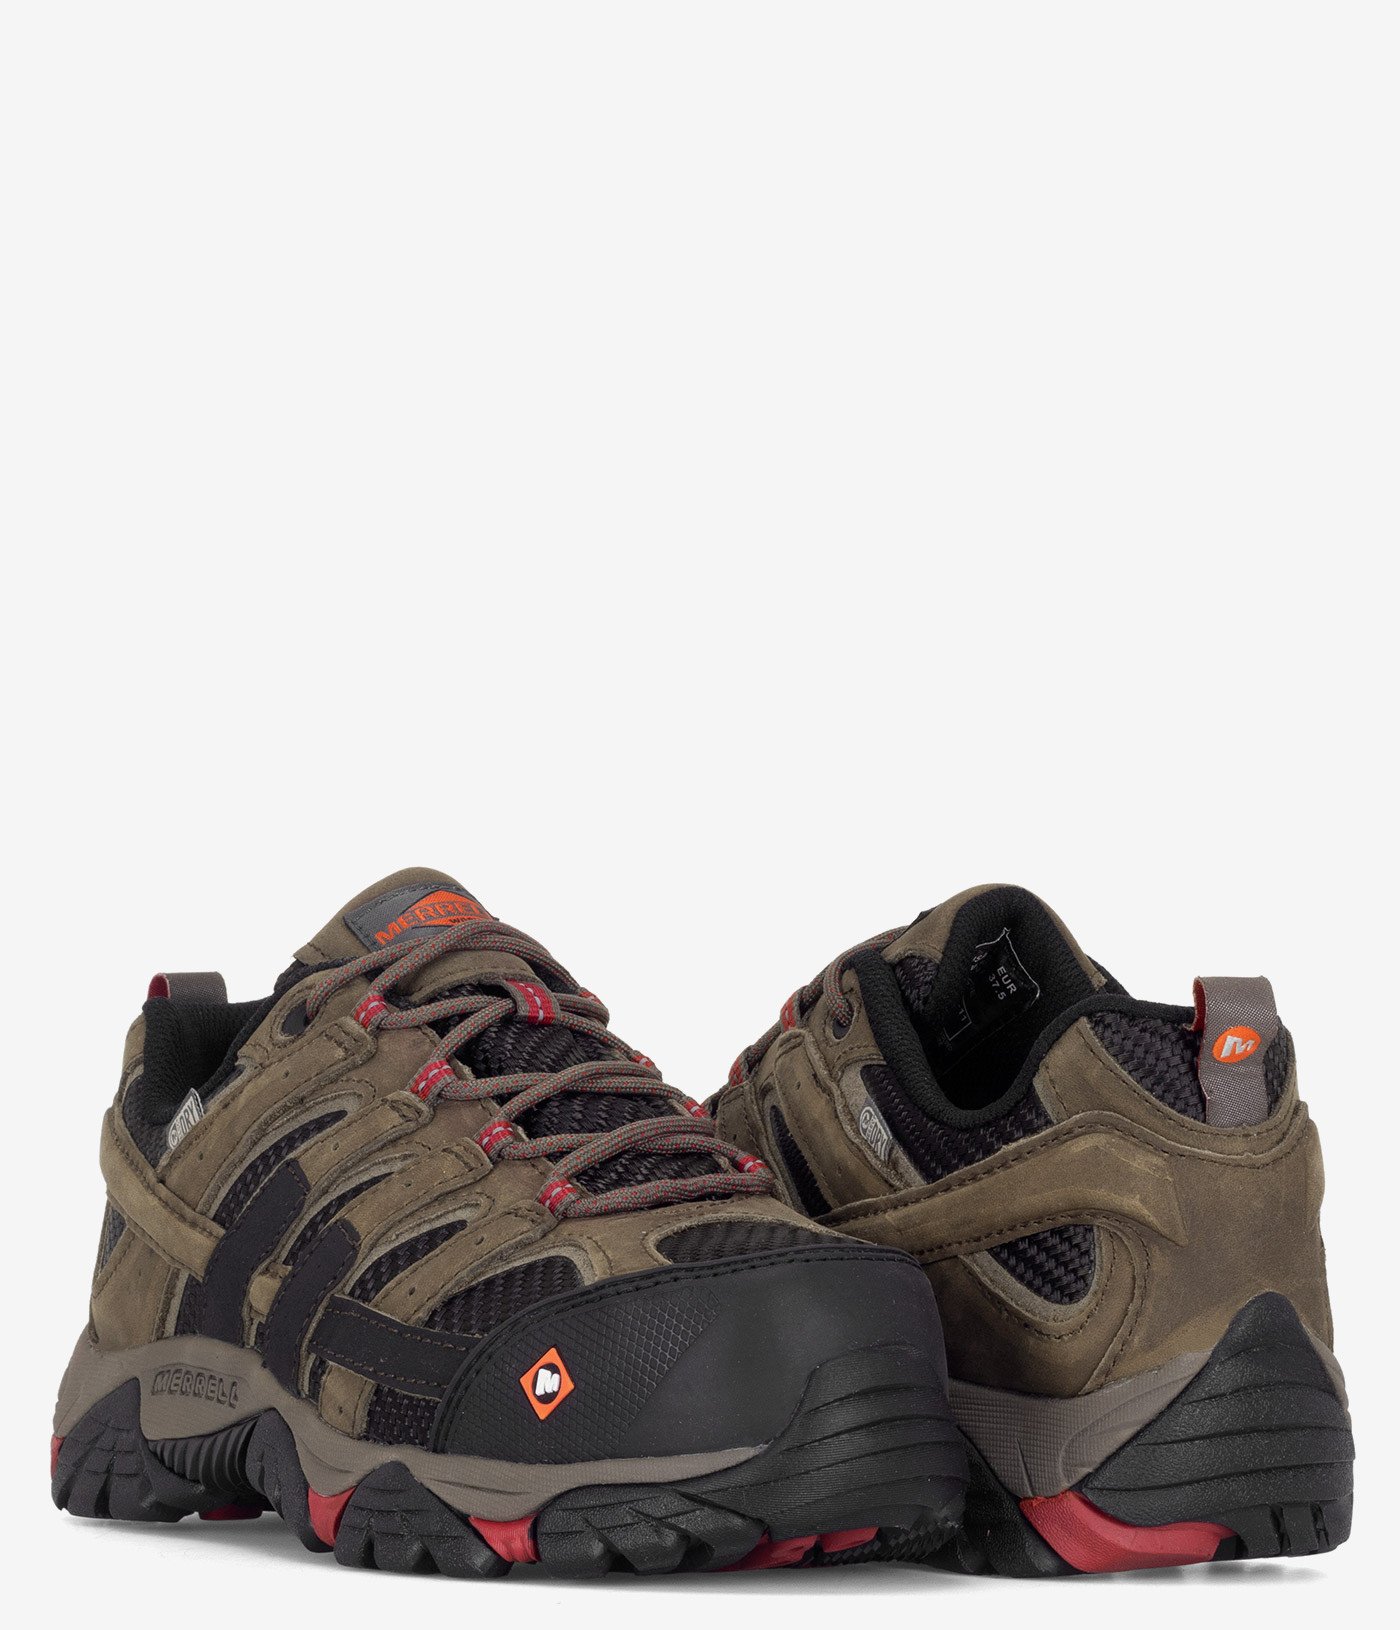 Merrell Work Moab 2 Vent Composite Safety Toe Shoe